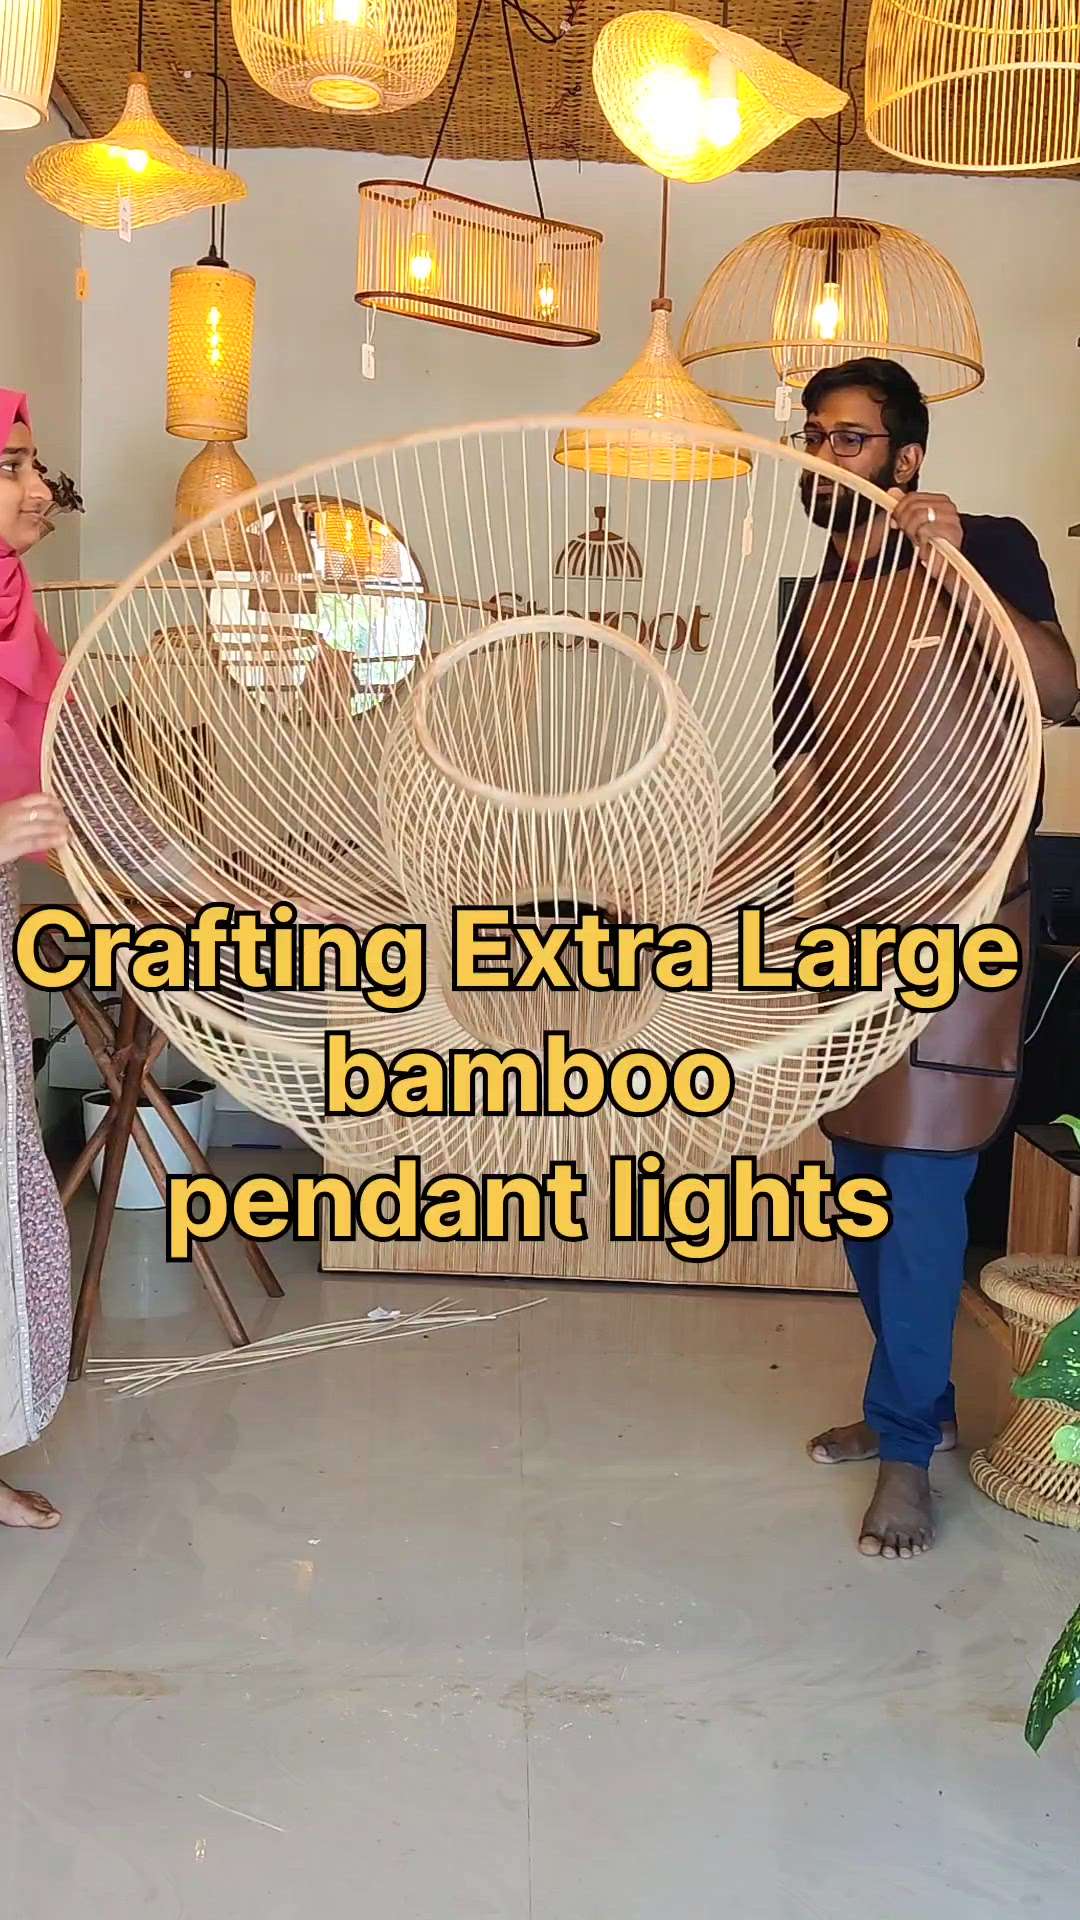 Crafting Customized Bamboo pendant lights. This handmade light is 1.2 m diameter and completely made out of natural bamboo. Sustainable architecture and green practice  #custamizedwork  #handmade #bamboo #bamboolights #madeinkerala #bamboointerior #sustainableconstruction #sustainabledesign #green⁠ #bohodecor #lighting